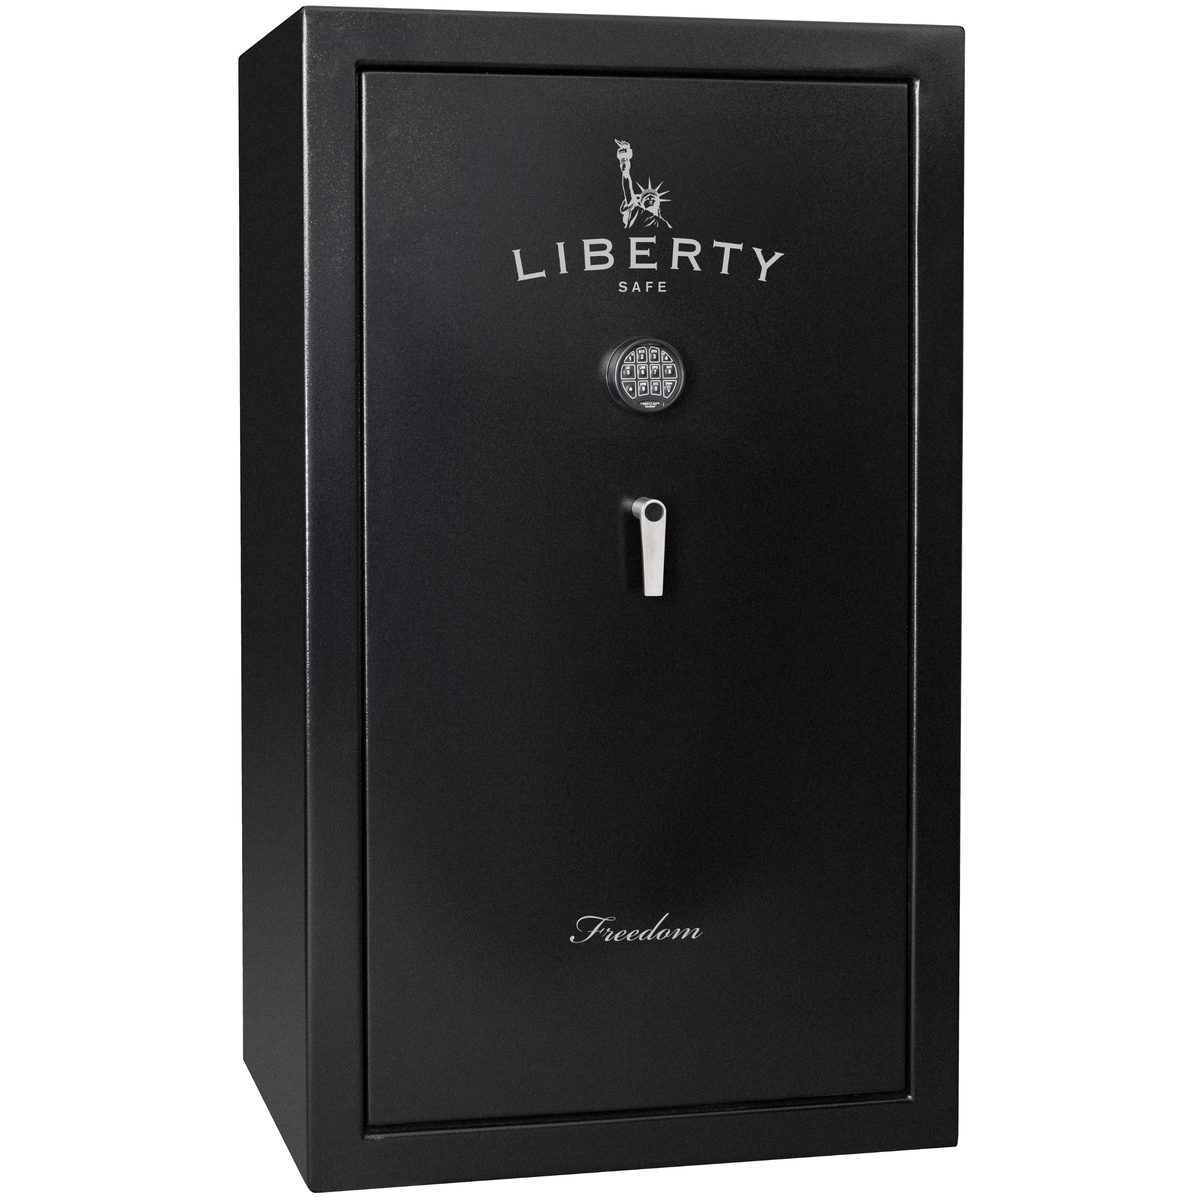 Freedom series | level 2 security | 40 minute fire rating - Liberty Safe - MODLOCK